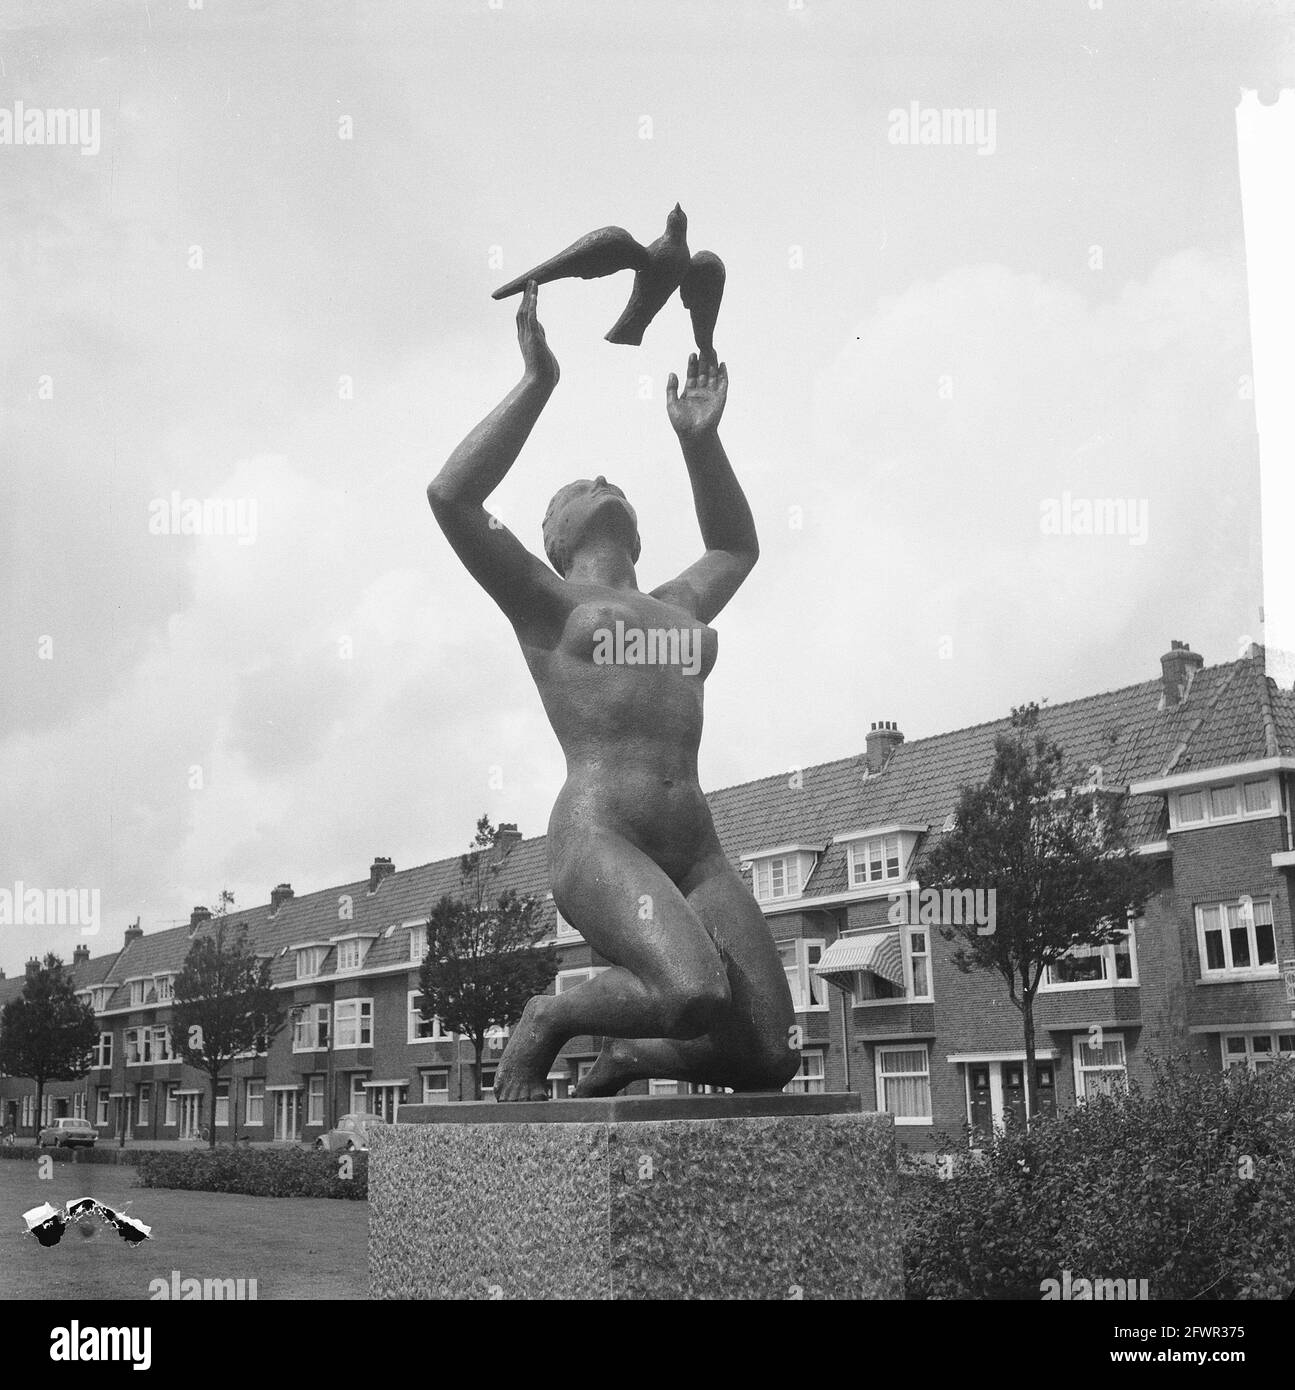 Night figure by sculptor Hans Reicher, August 10, 1962, PICTURES, sculptors, The Netherlands, 20th century press agency photo, news to remember, documentary, historic photography 1945-1990, visual stories, human history of the Twentieth Century, capturing moments in time Stock Photo